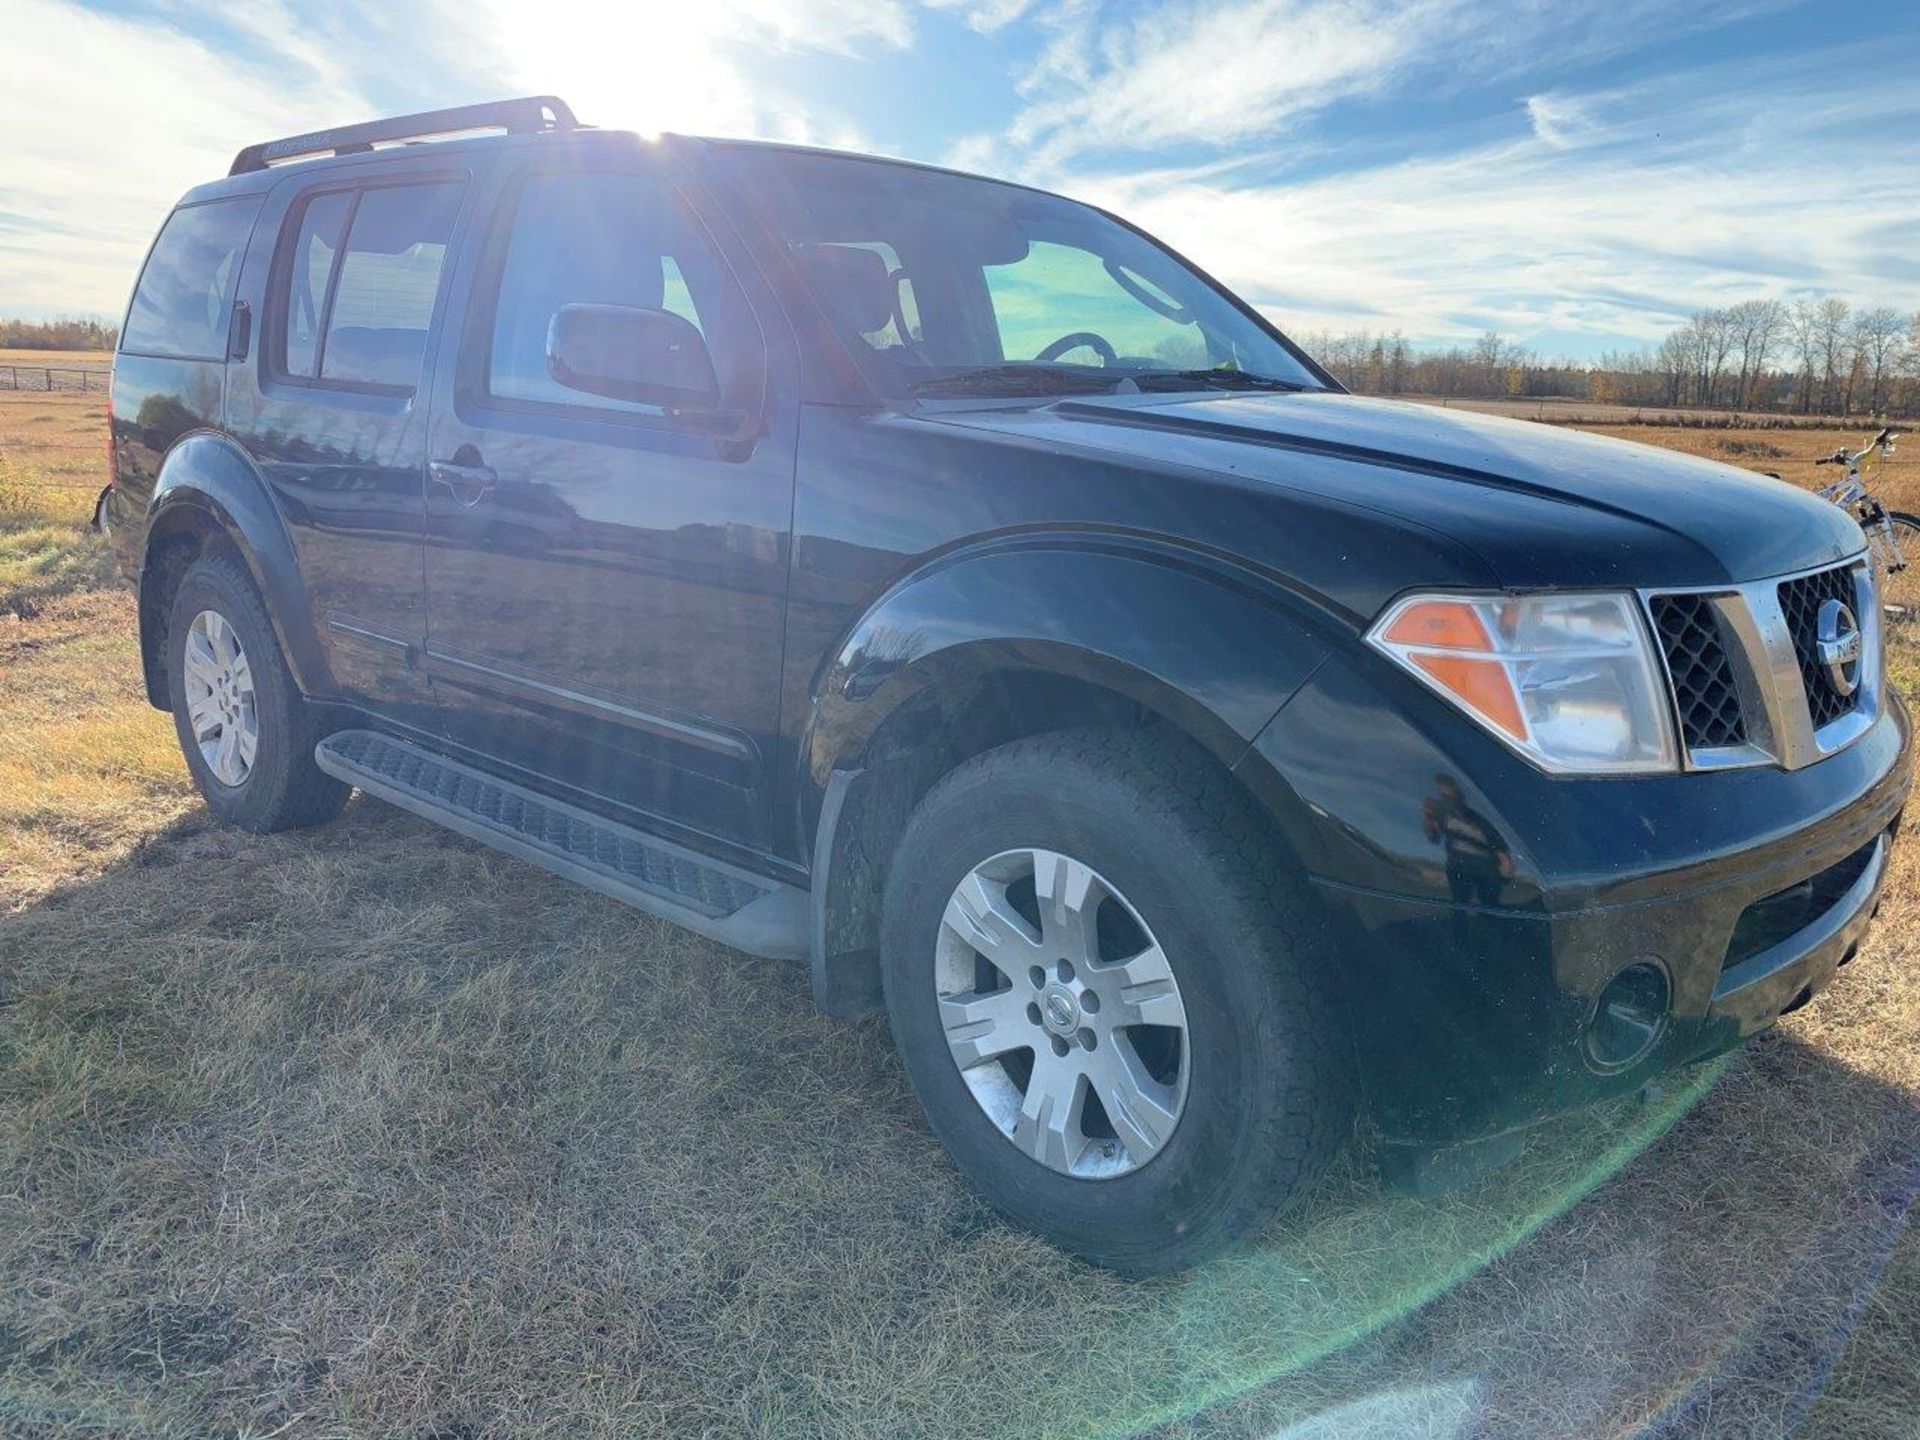 2005 NISSAN PATHFINDER SUV, 4X4, 4.0L GAS ENG, 4-DR, LEATHER INT. 119,524 KMS SHOWING - Image 2 of 11